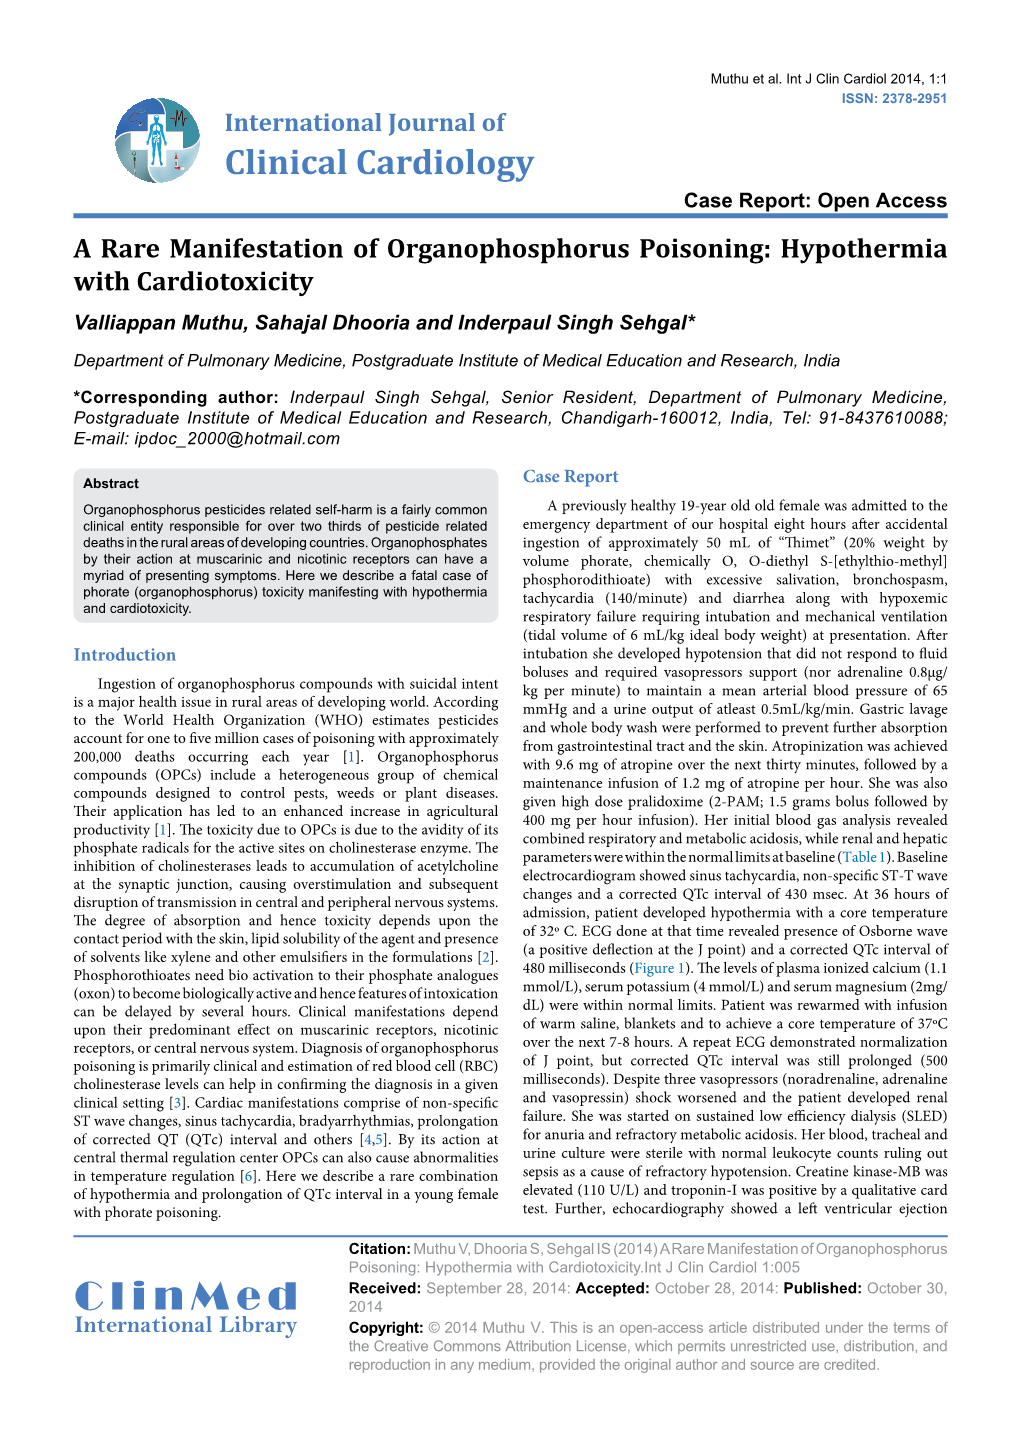 A Rare Manifestation of Organophosphorus Poisoning: Hypothermia with Cardiotoxicity Valliappan Muthu, Sahajal Dhooria and Inderpaul Singh Sehgal*